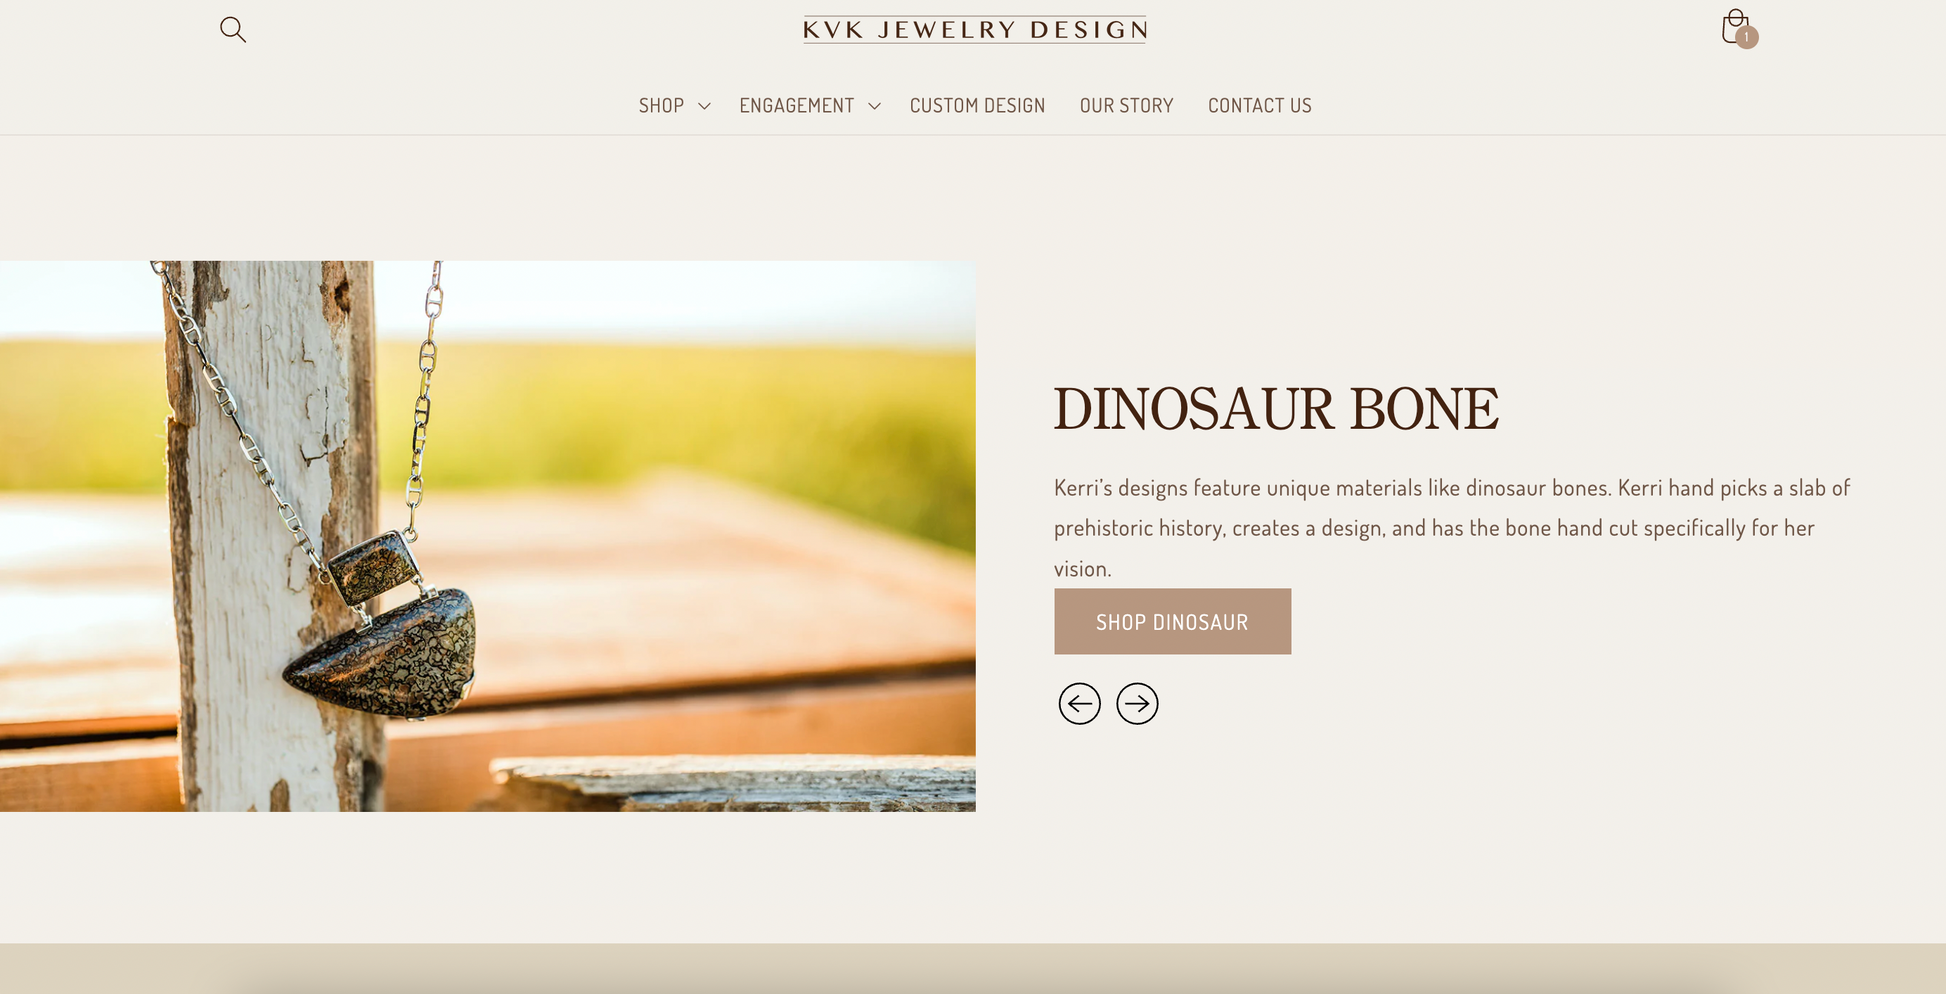 Dinosaur bone jewelry featured products for KVK Jewelry Design-a website designed by 29TH DESIGN